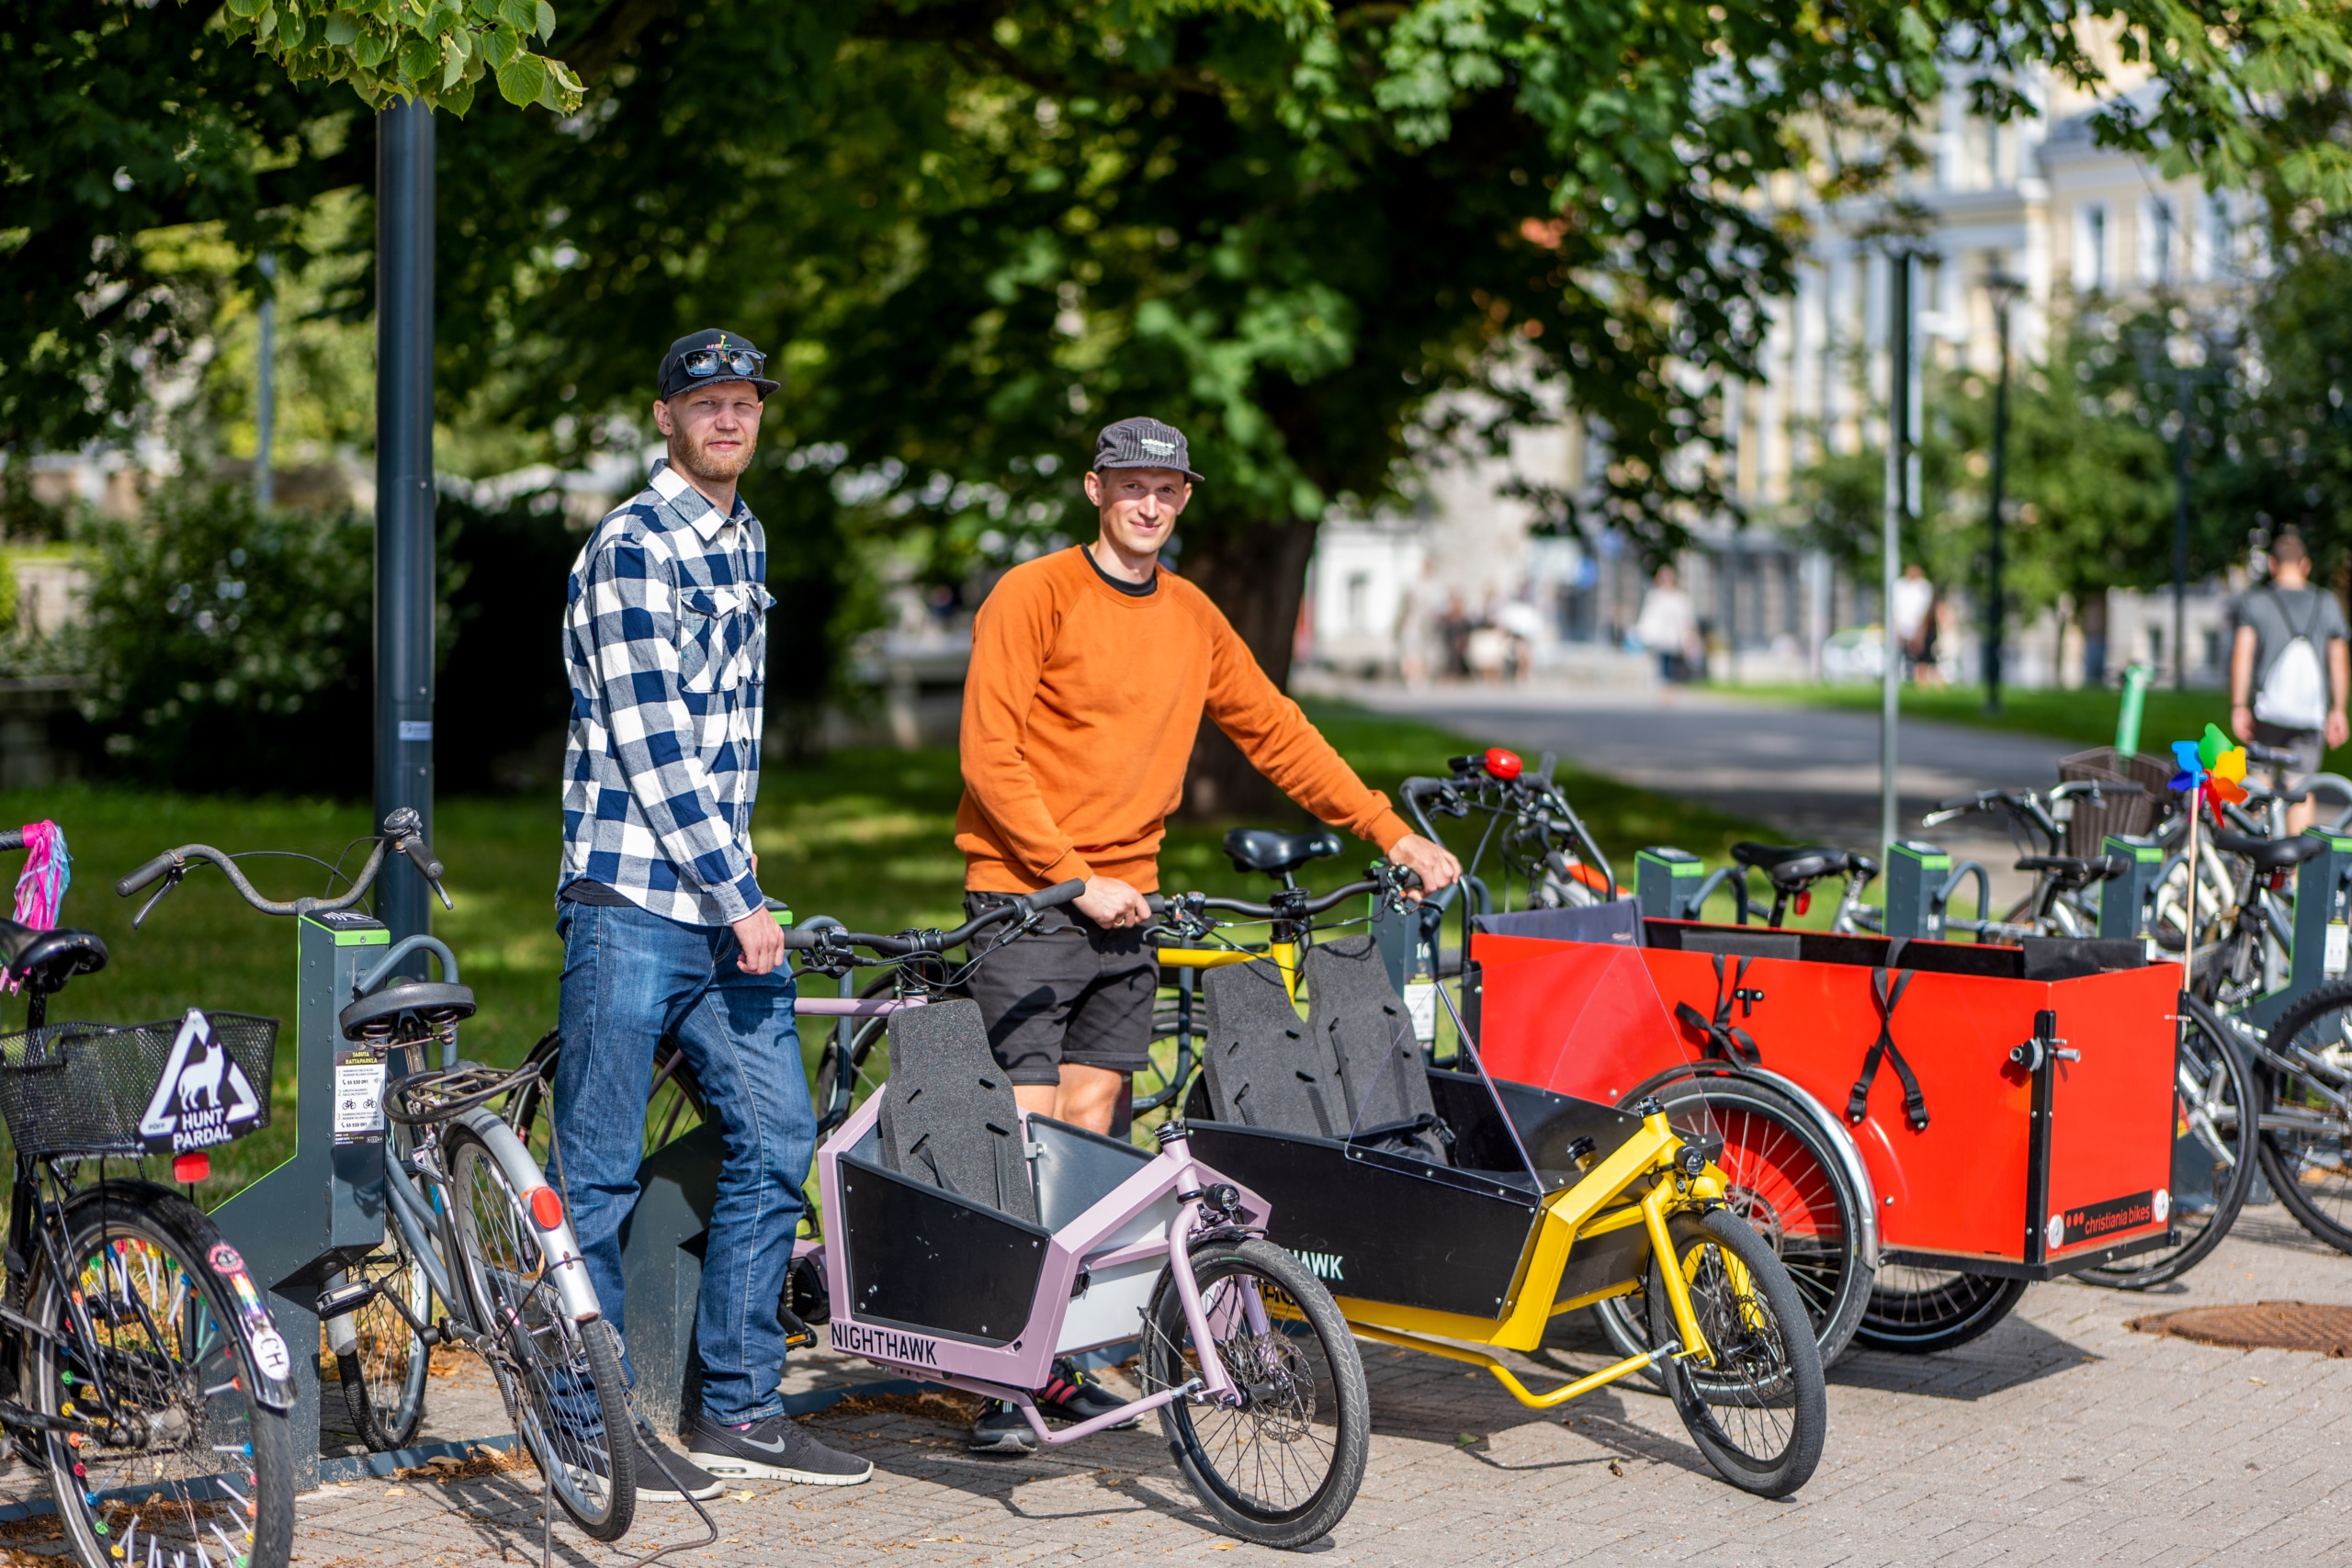 50% of all motorised trips could be done on bicycles and cargo bikes